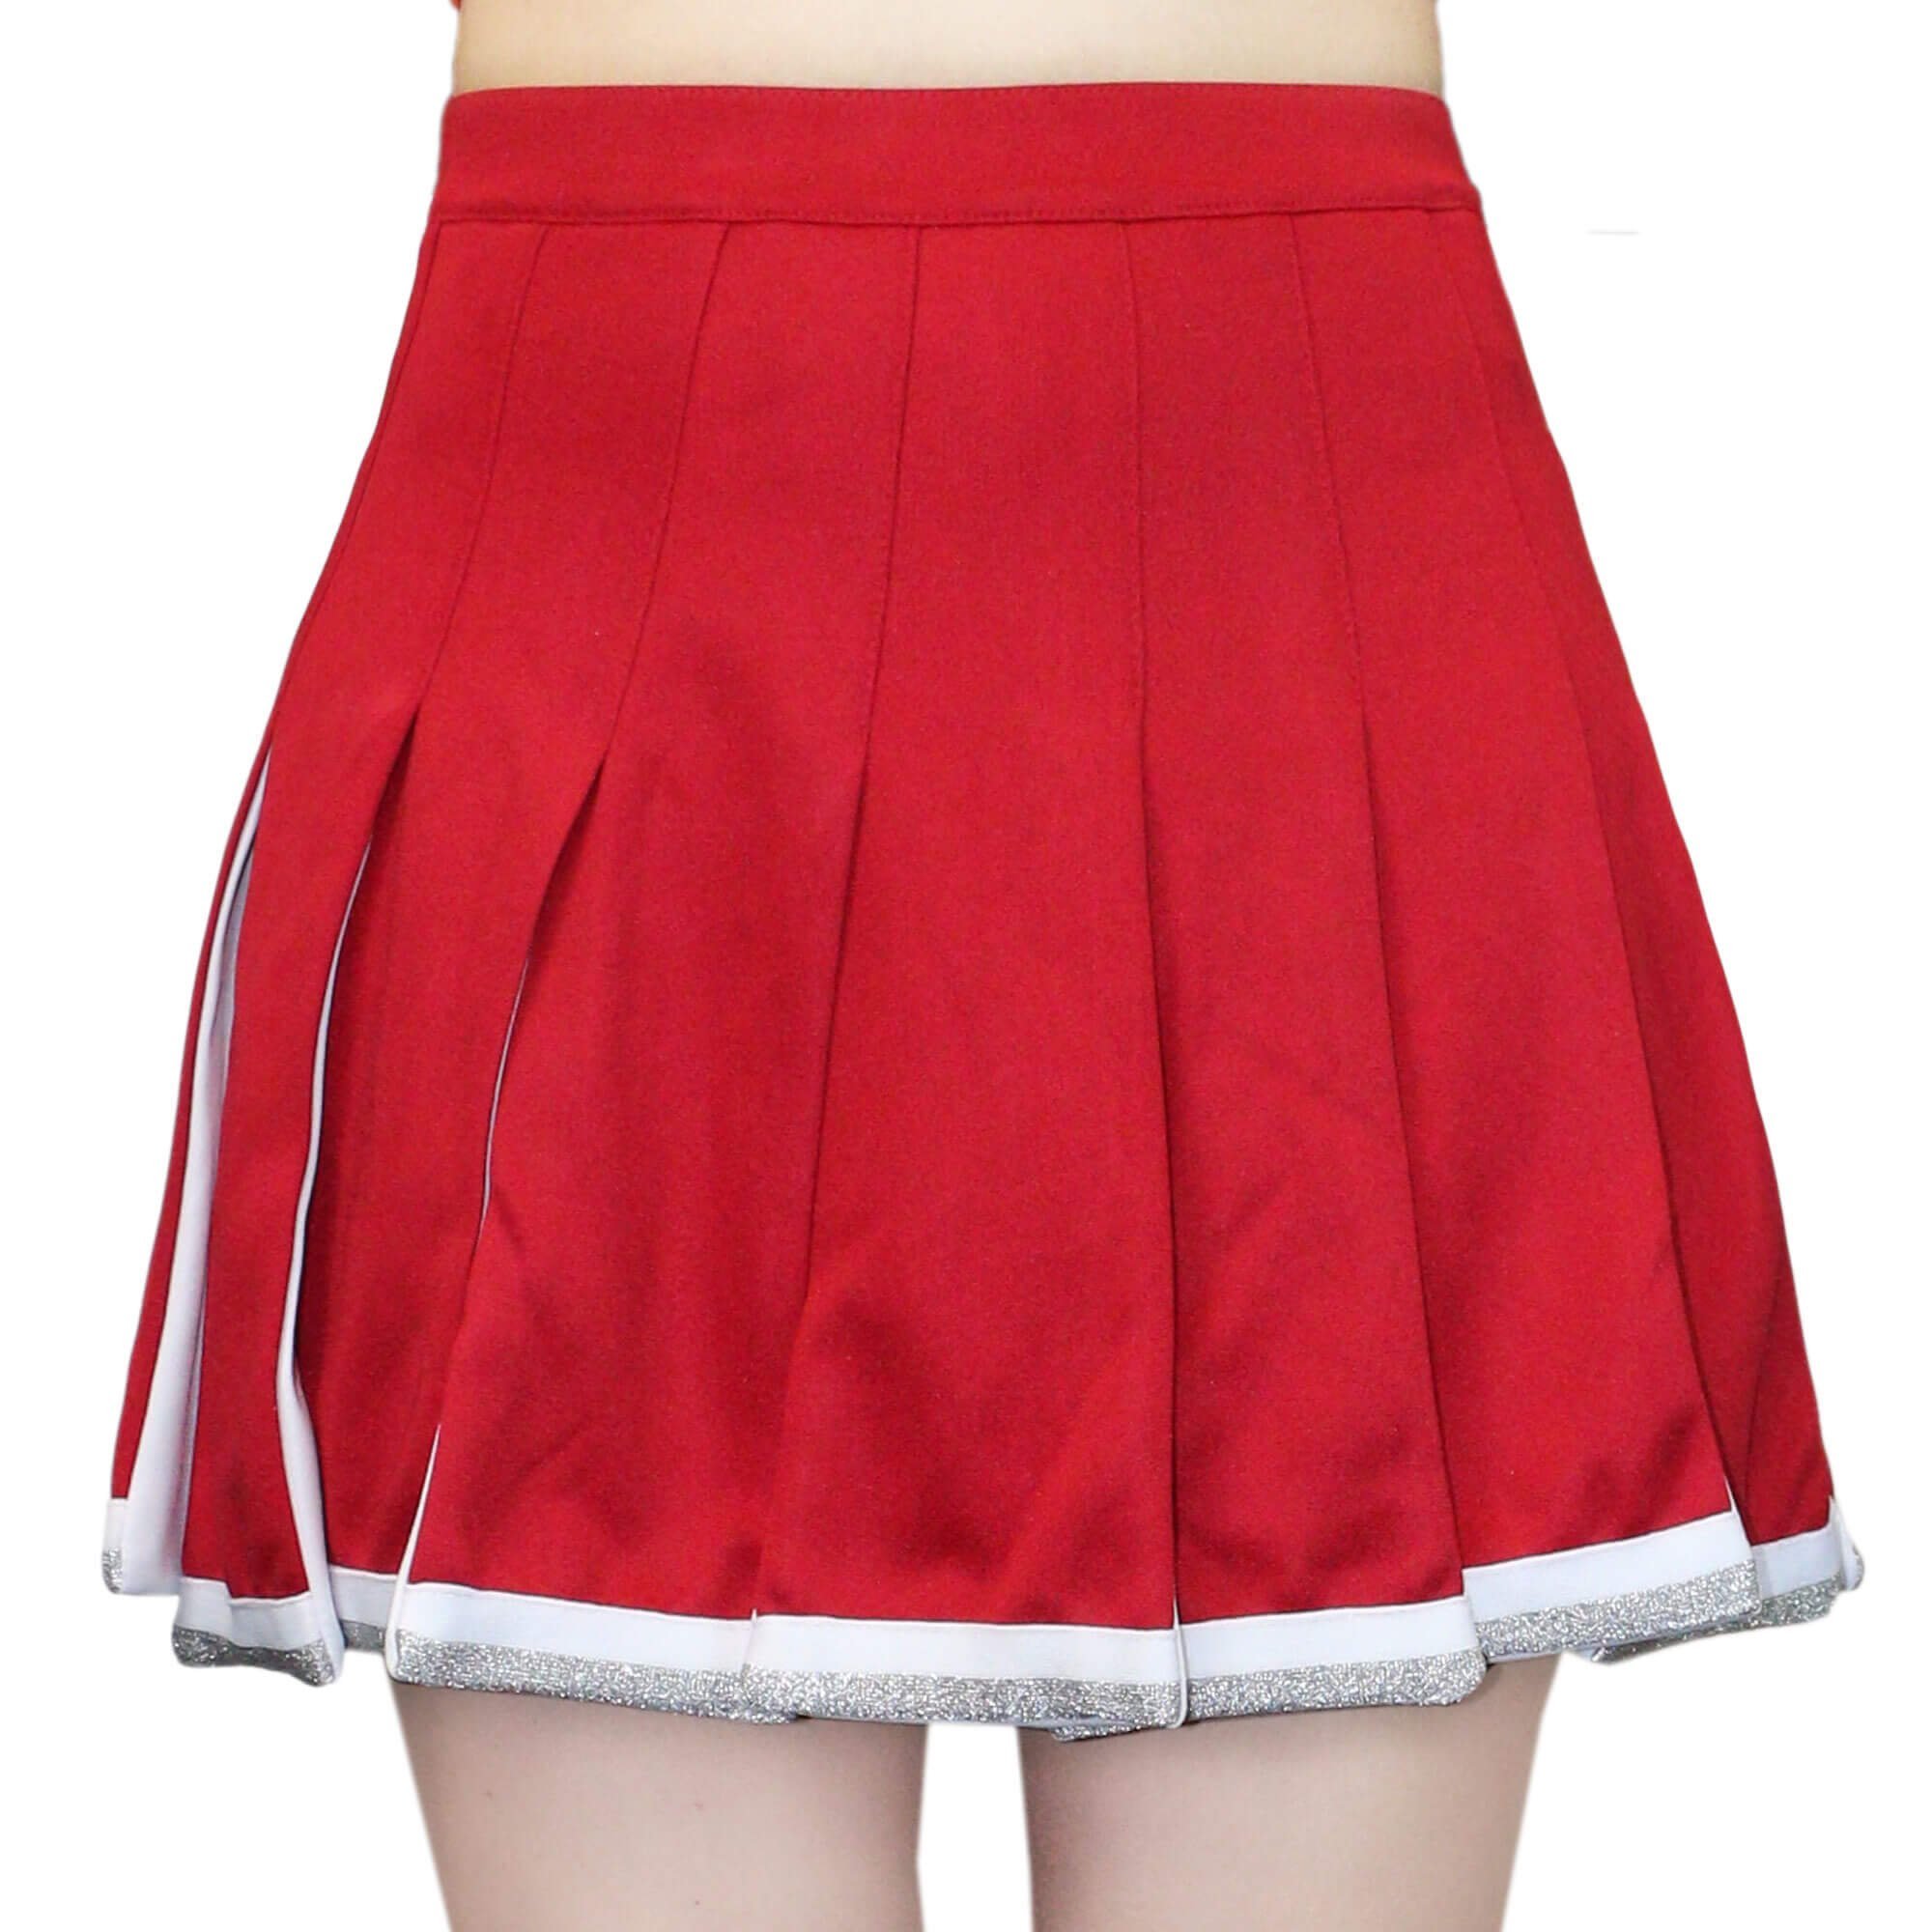 Danzcue Adult Cheerleading Pleated Skirt - Click Image to Close